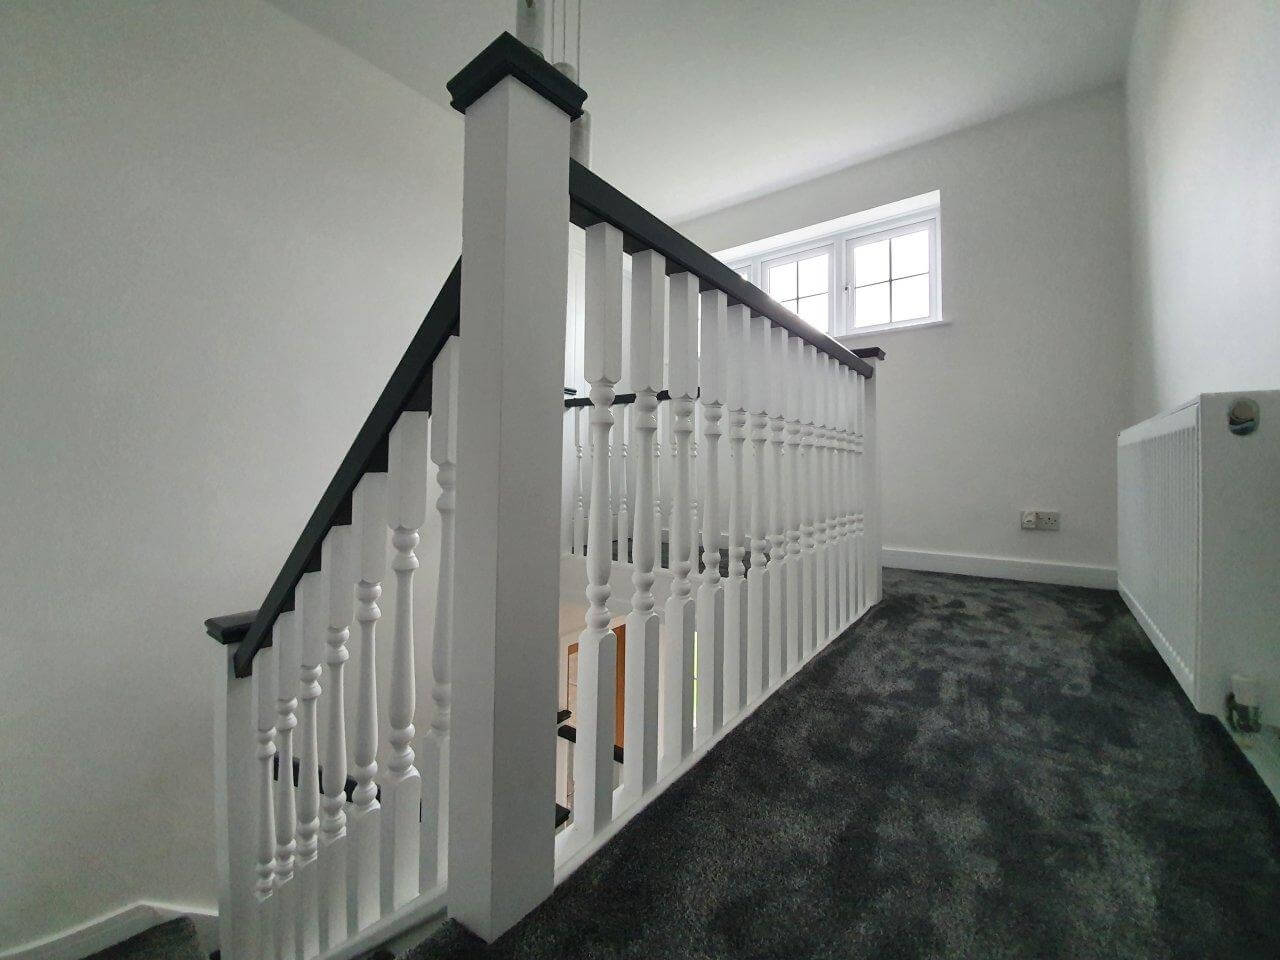 A hallway, stairwell and landing after being decorated, striking black and white